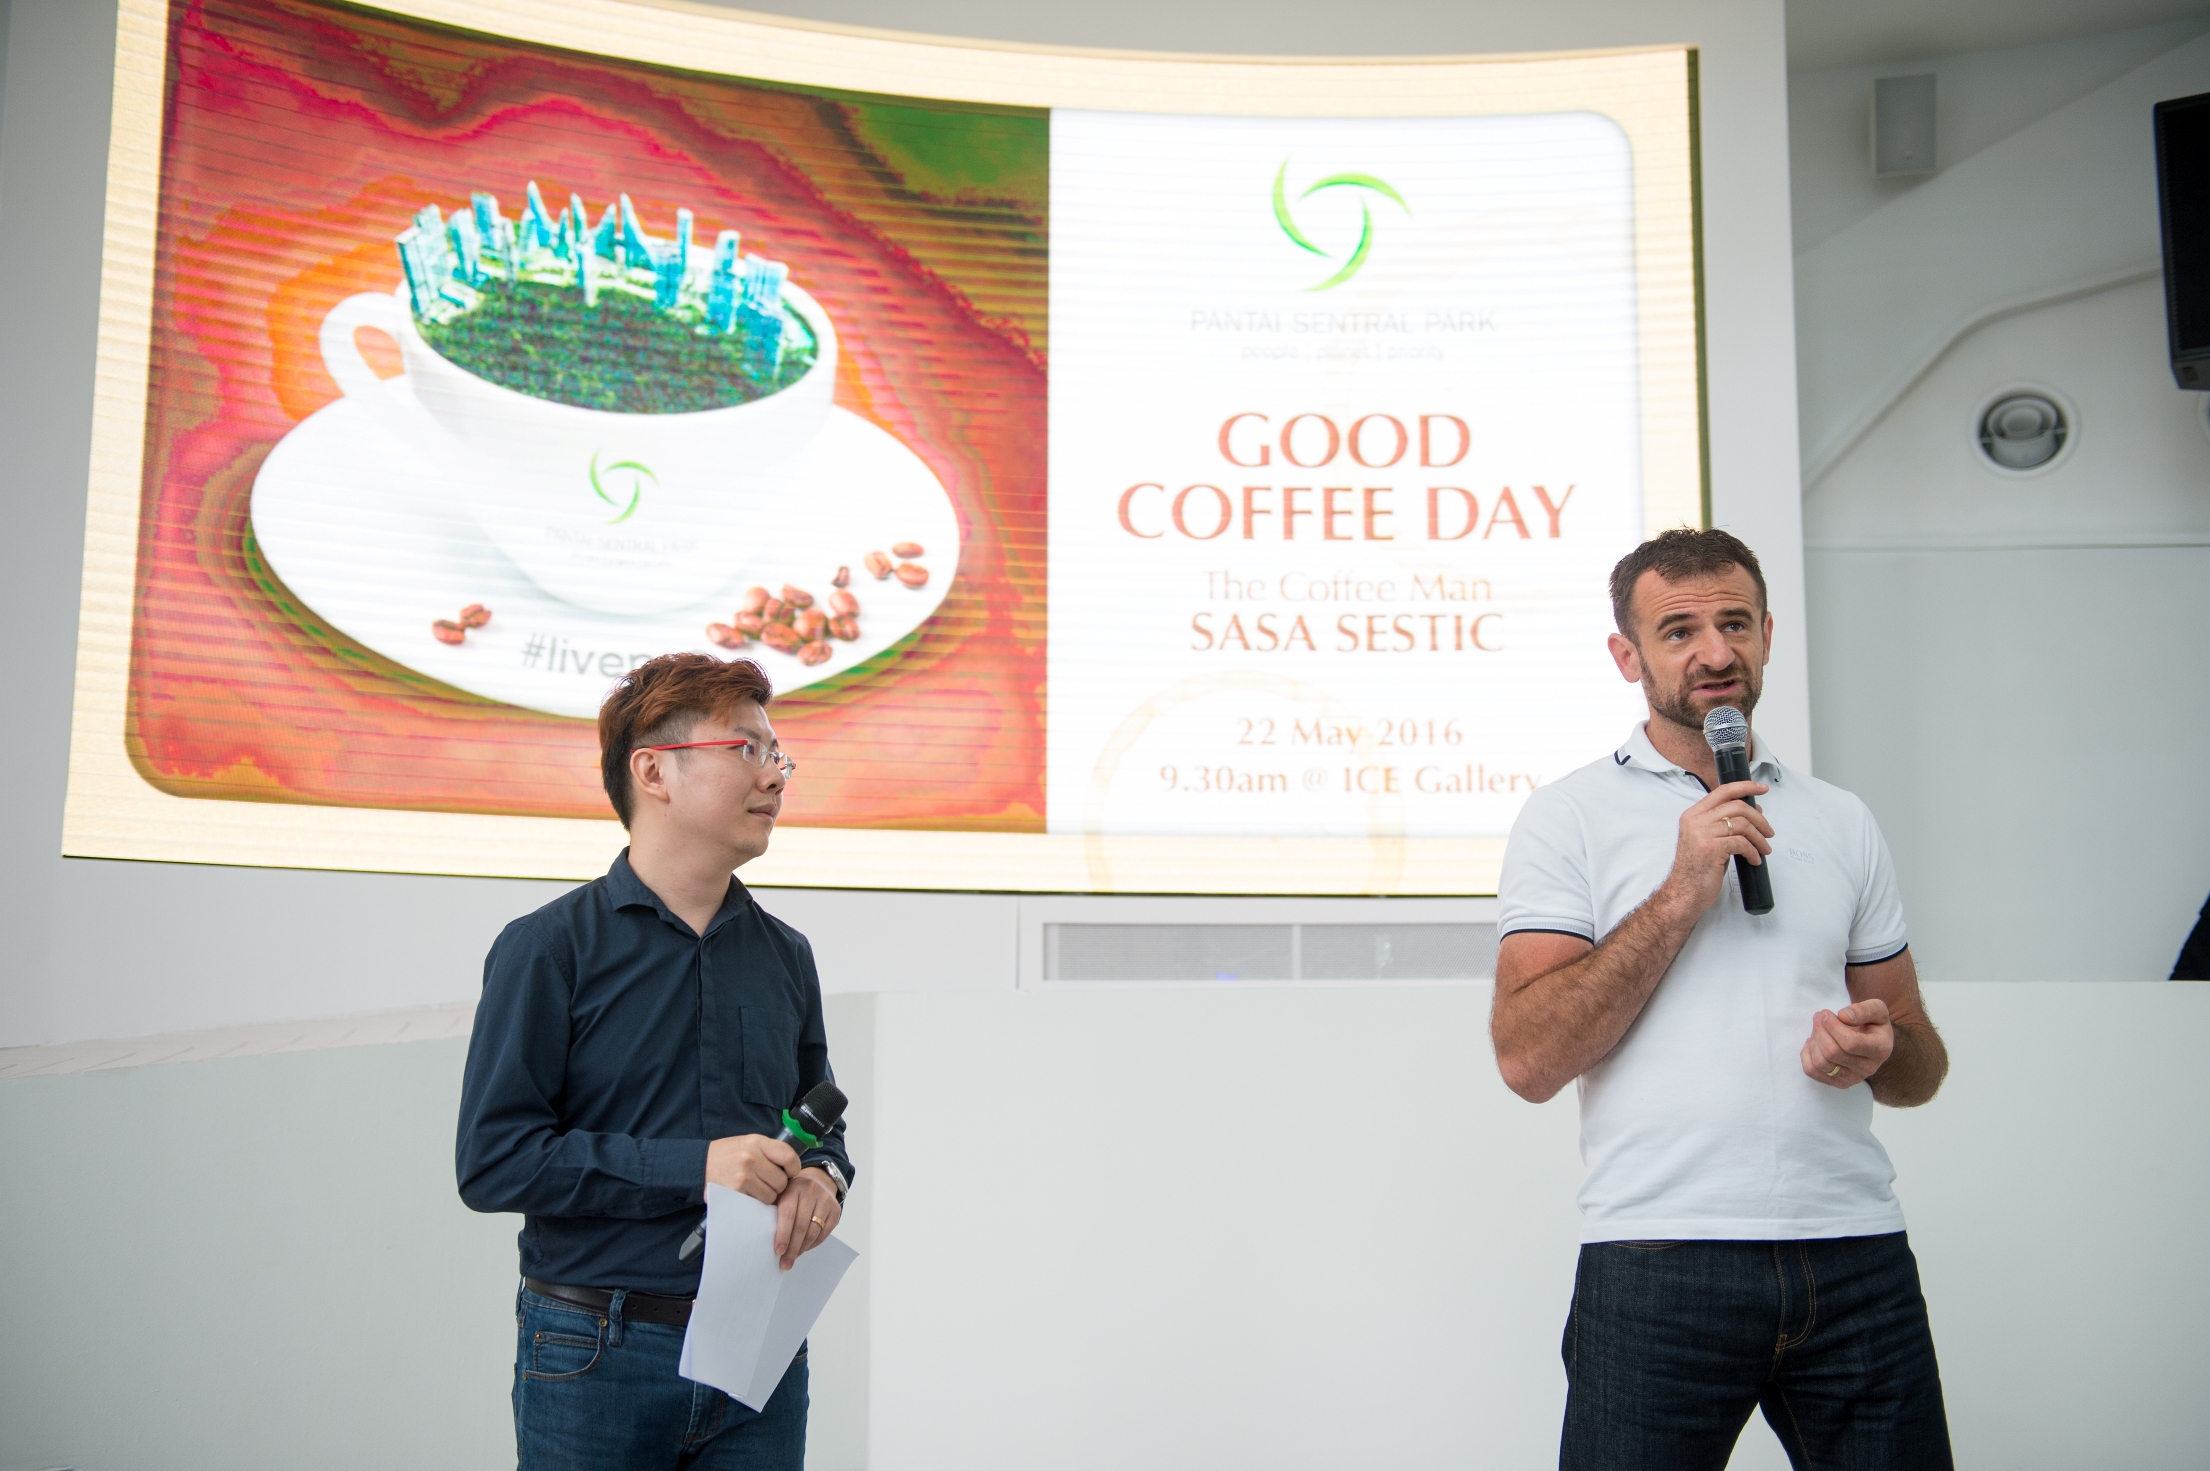 2015 World Barista Champion Sasa Sestic joins the screening and shares some interesting insights into his career